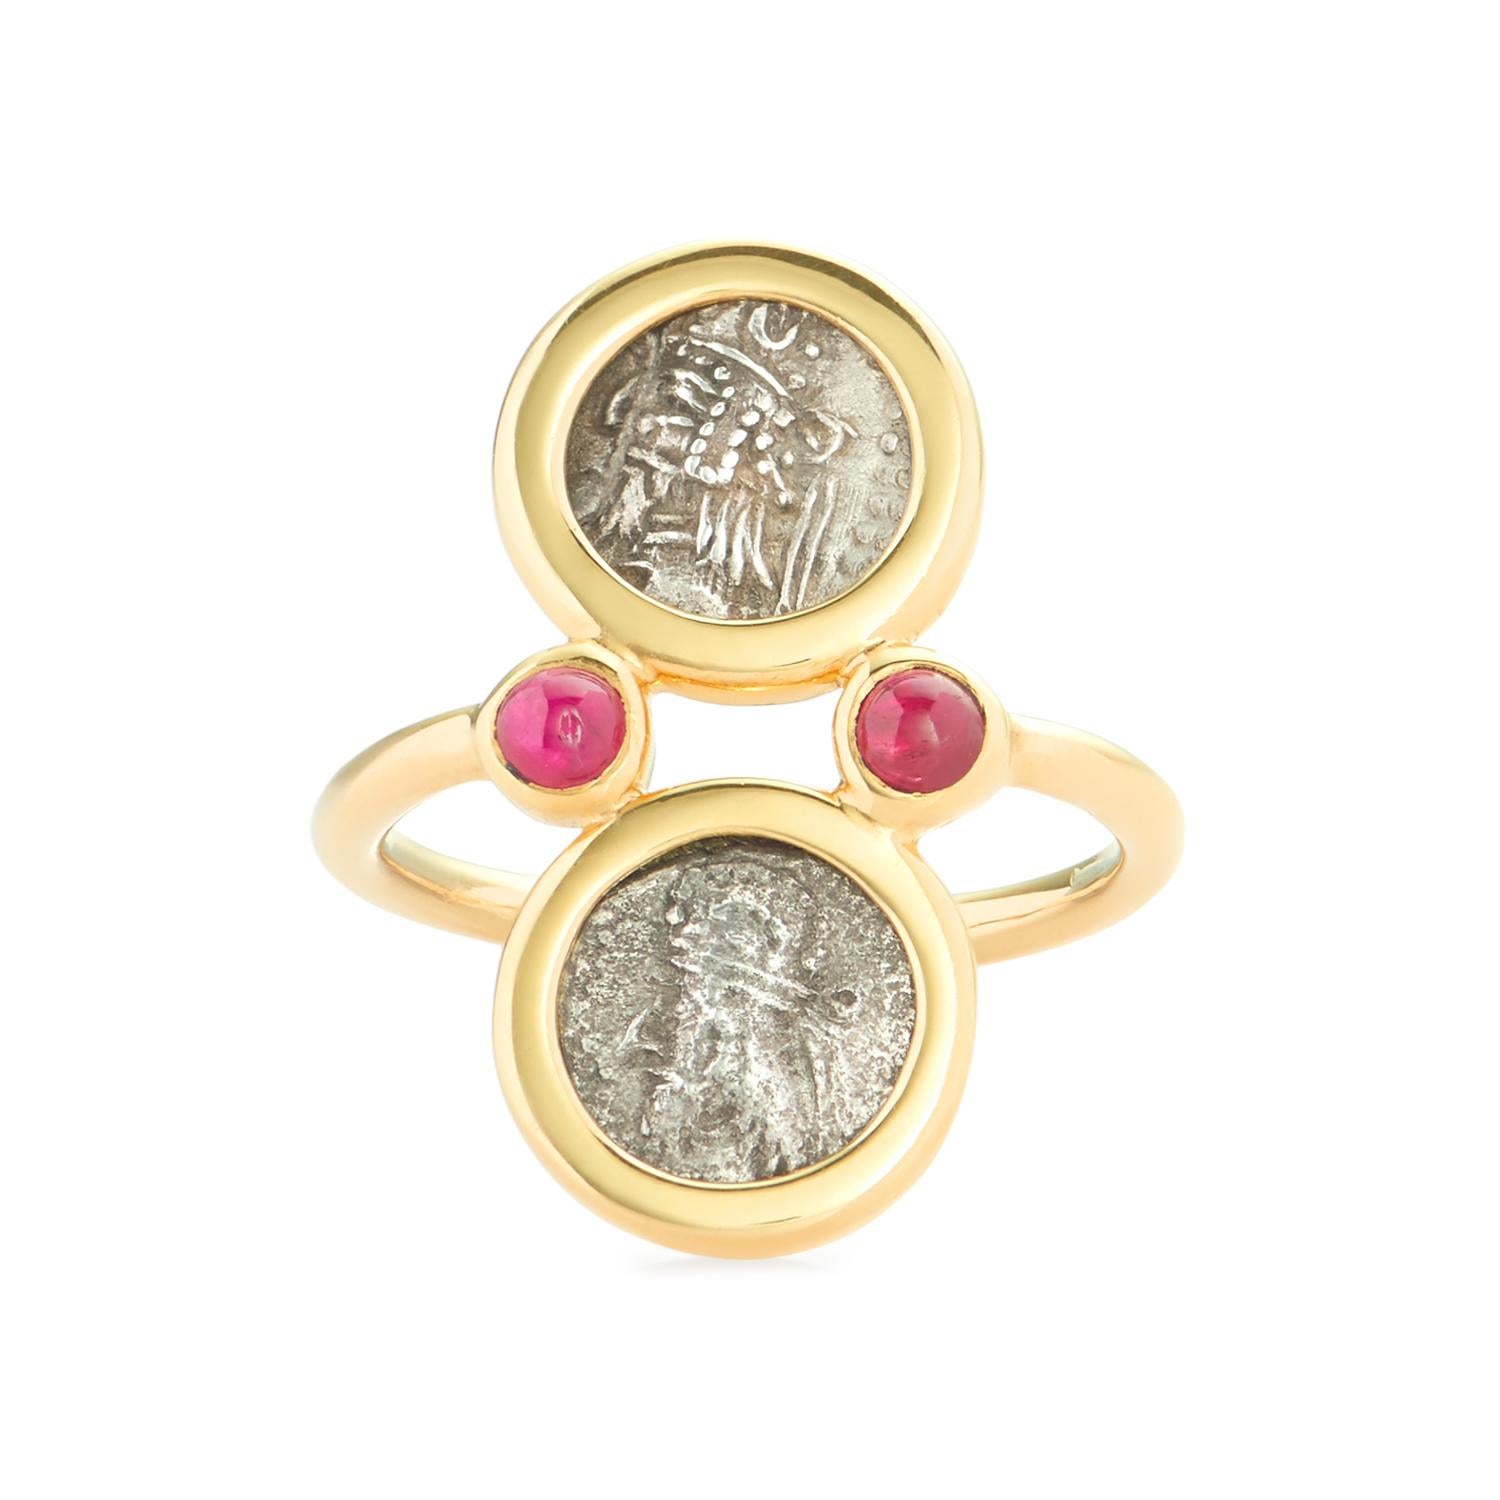 This DUBINI coin ring from the 'Empires' collection features authentic Persepolis coins minted circa 1st Century B.C. set in 18K yellow gold with ruby cabochons.

The ring is size EU 52 and can be resized with with a lead time of 1 week.

* Due to